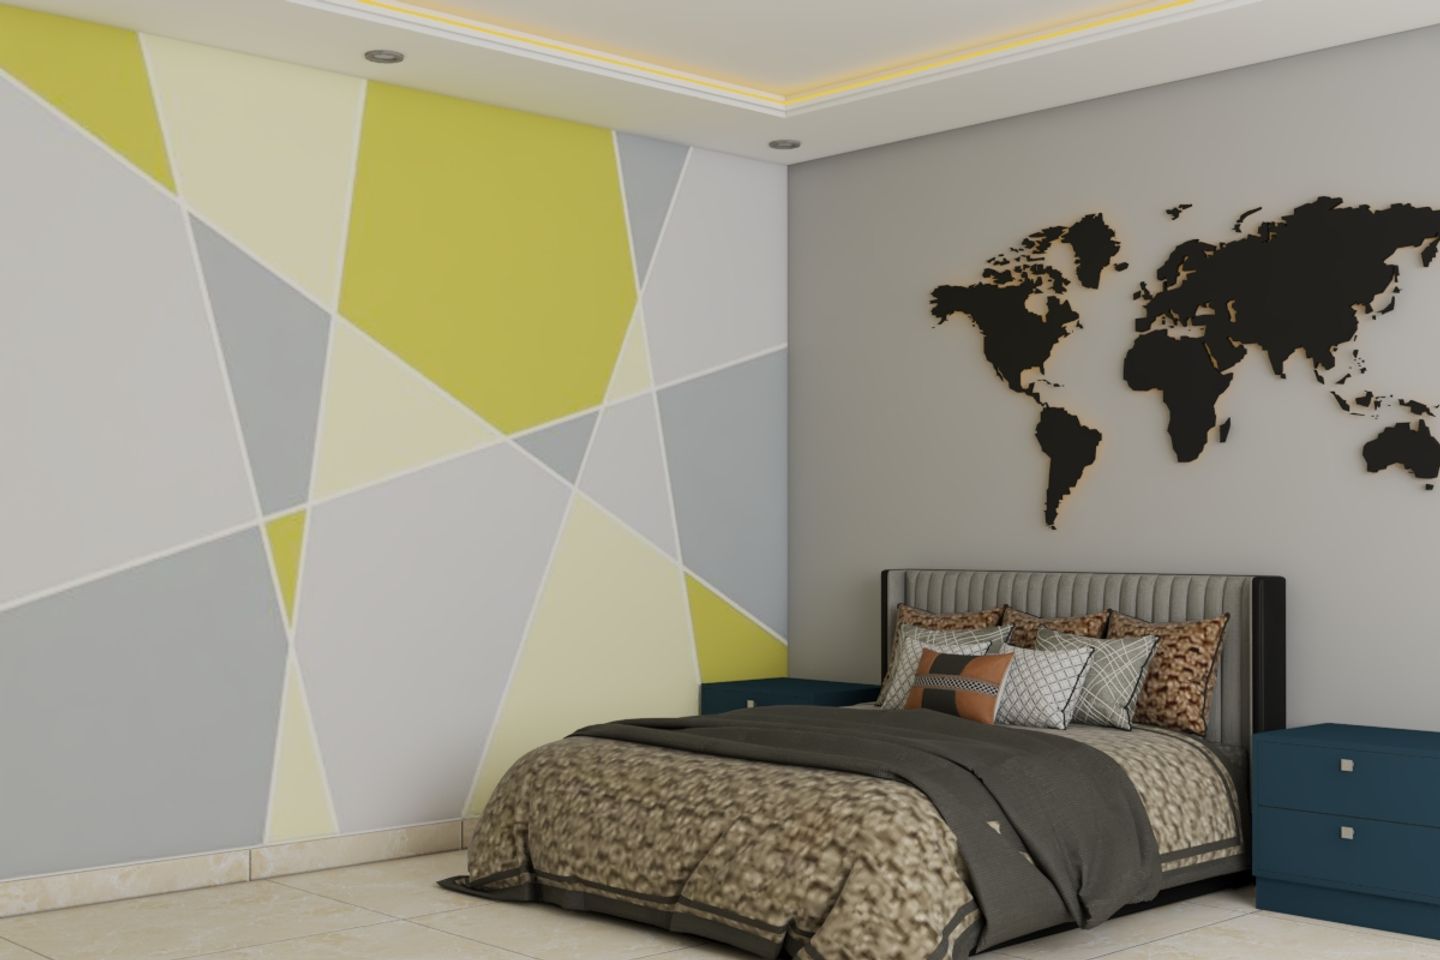 Compact Kid's Room With Yellow-Grey Wall - Livspace